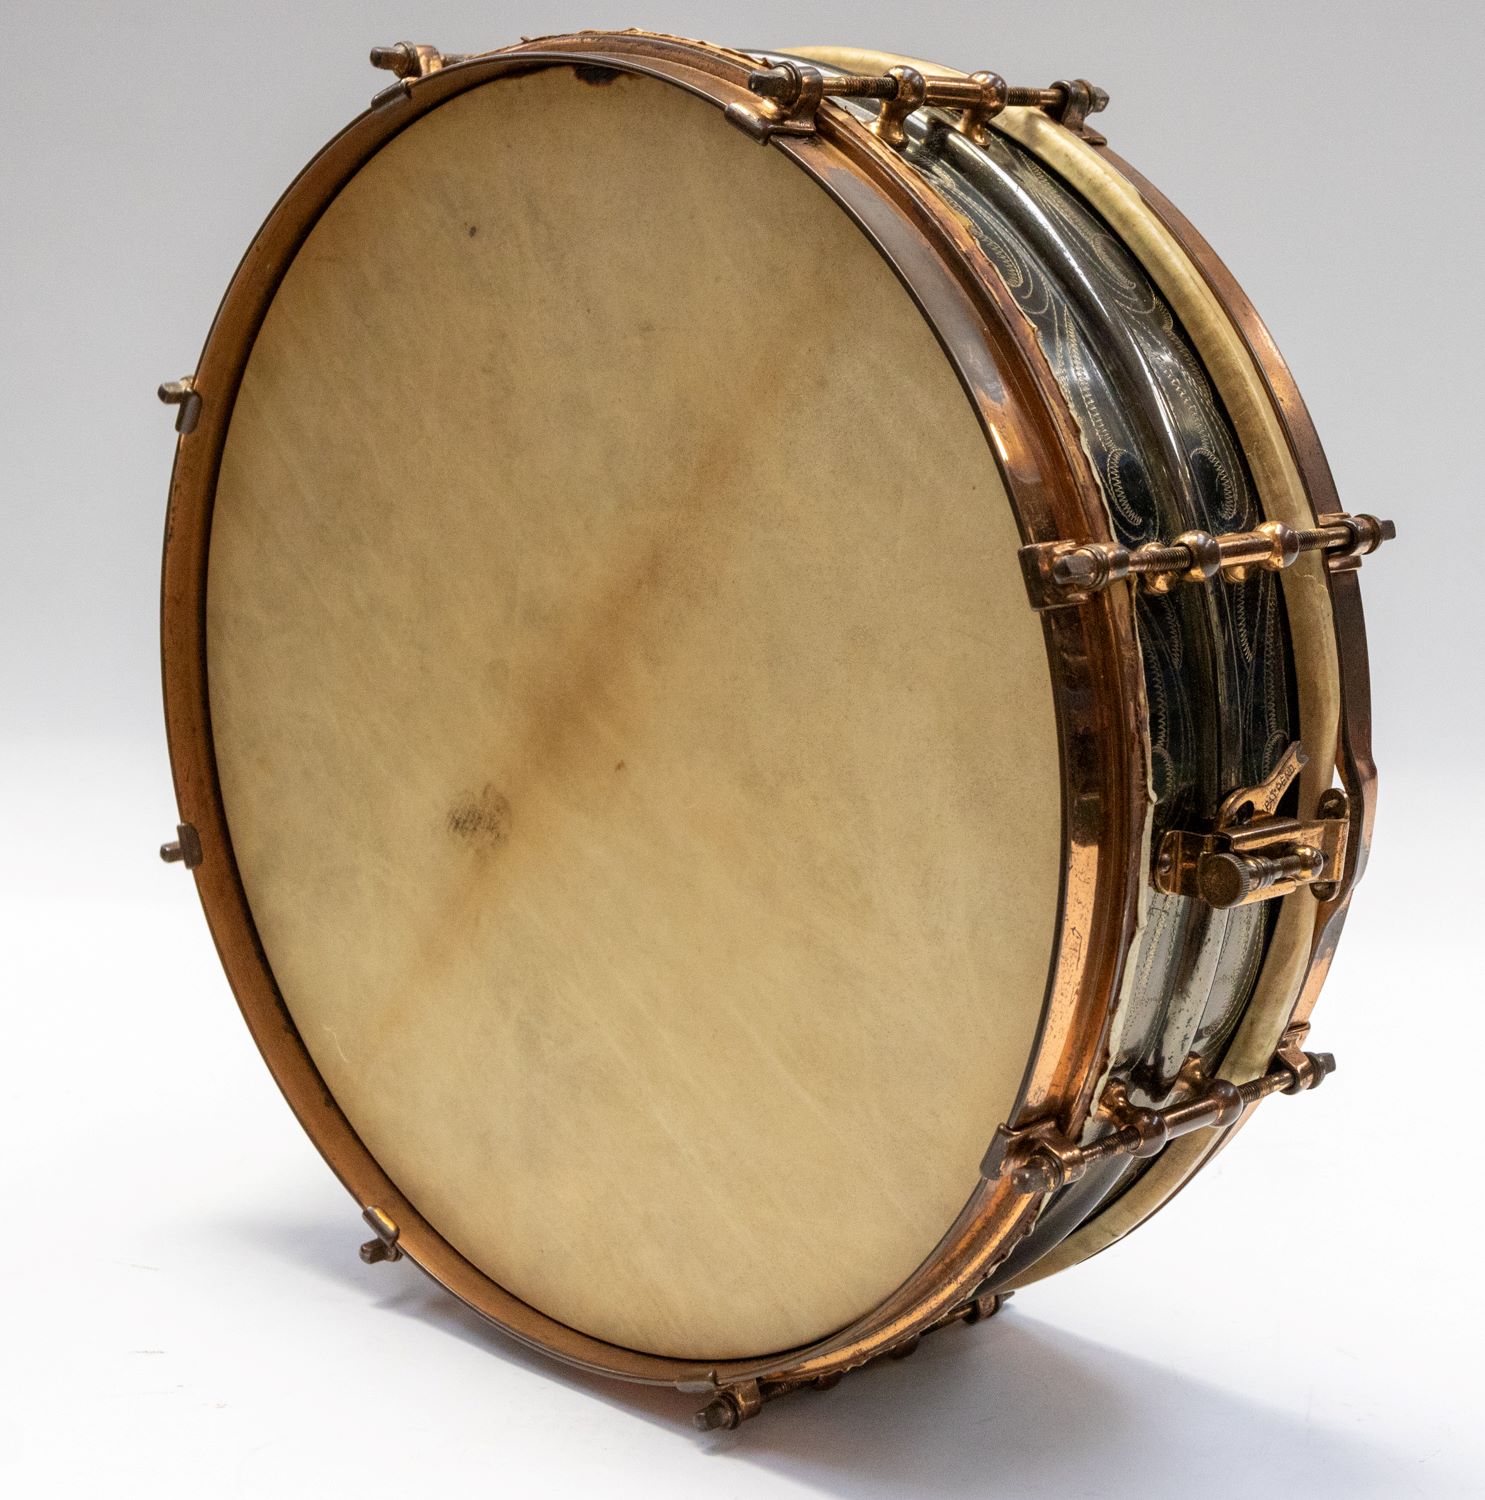 The rare size No. 5 Dance Model ‘delux’. drum up for auction.